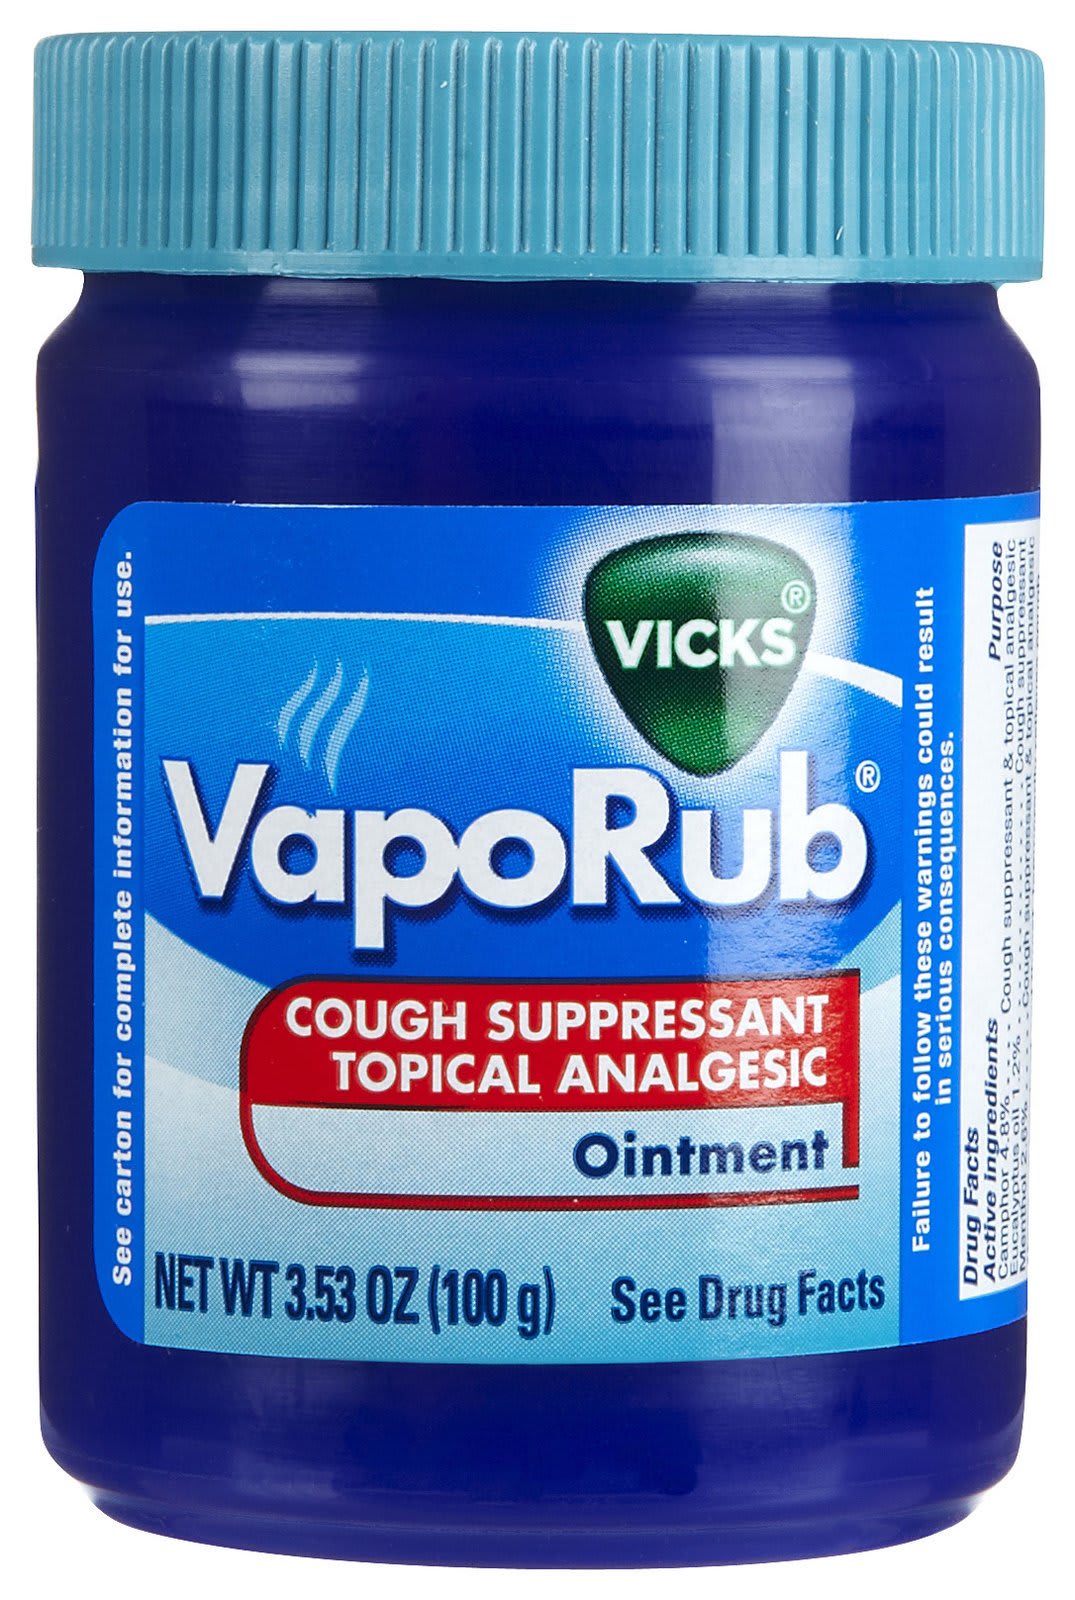 Vicks VapoRub, Chest Rub Ointment, Relief from Cough, Cold, Aches, & Pains  with Original Medicated Vicks Vapors, Topical Cough Suppressant, 1.76 Ounce